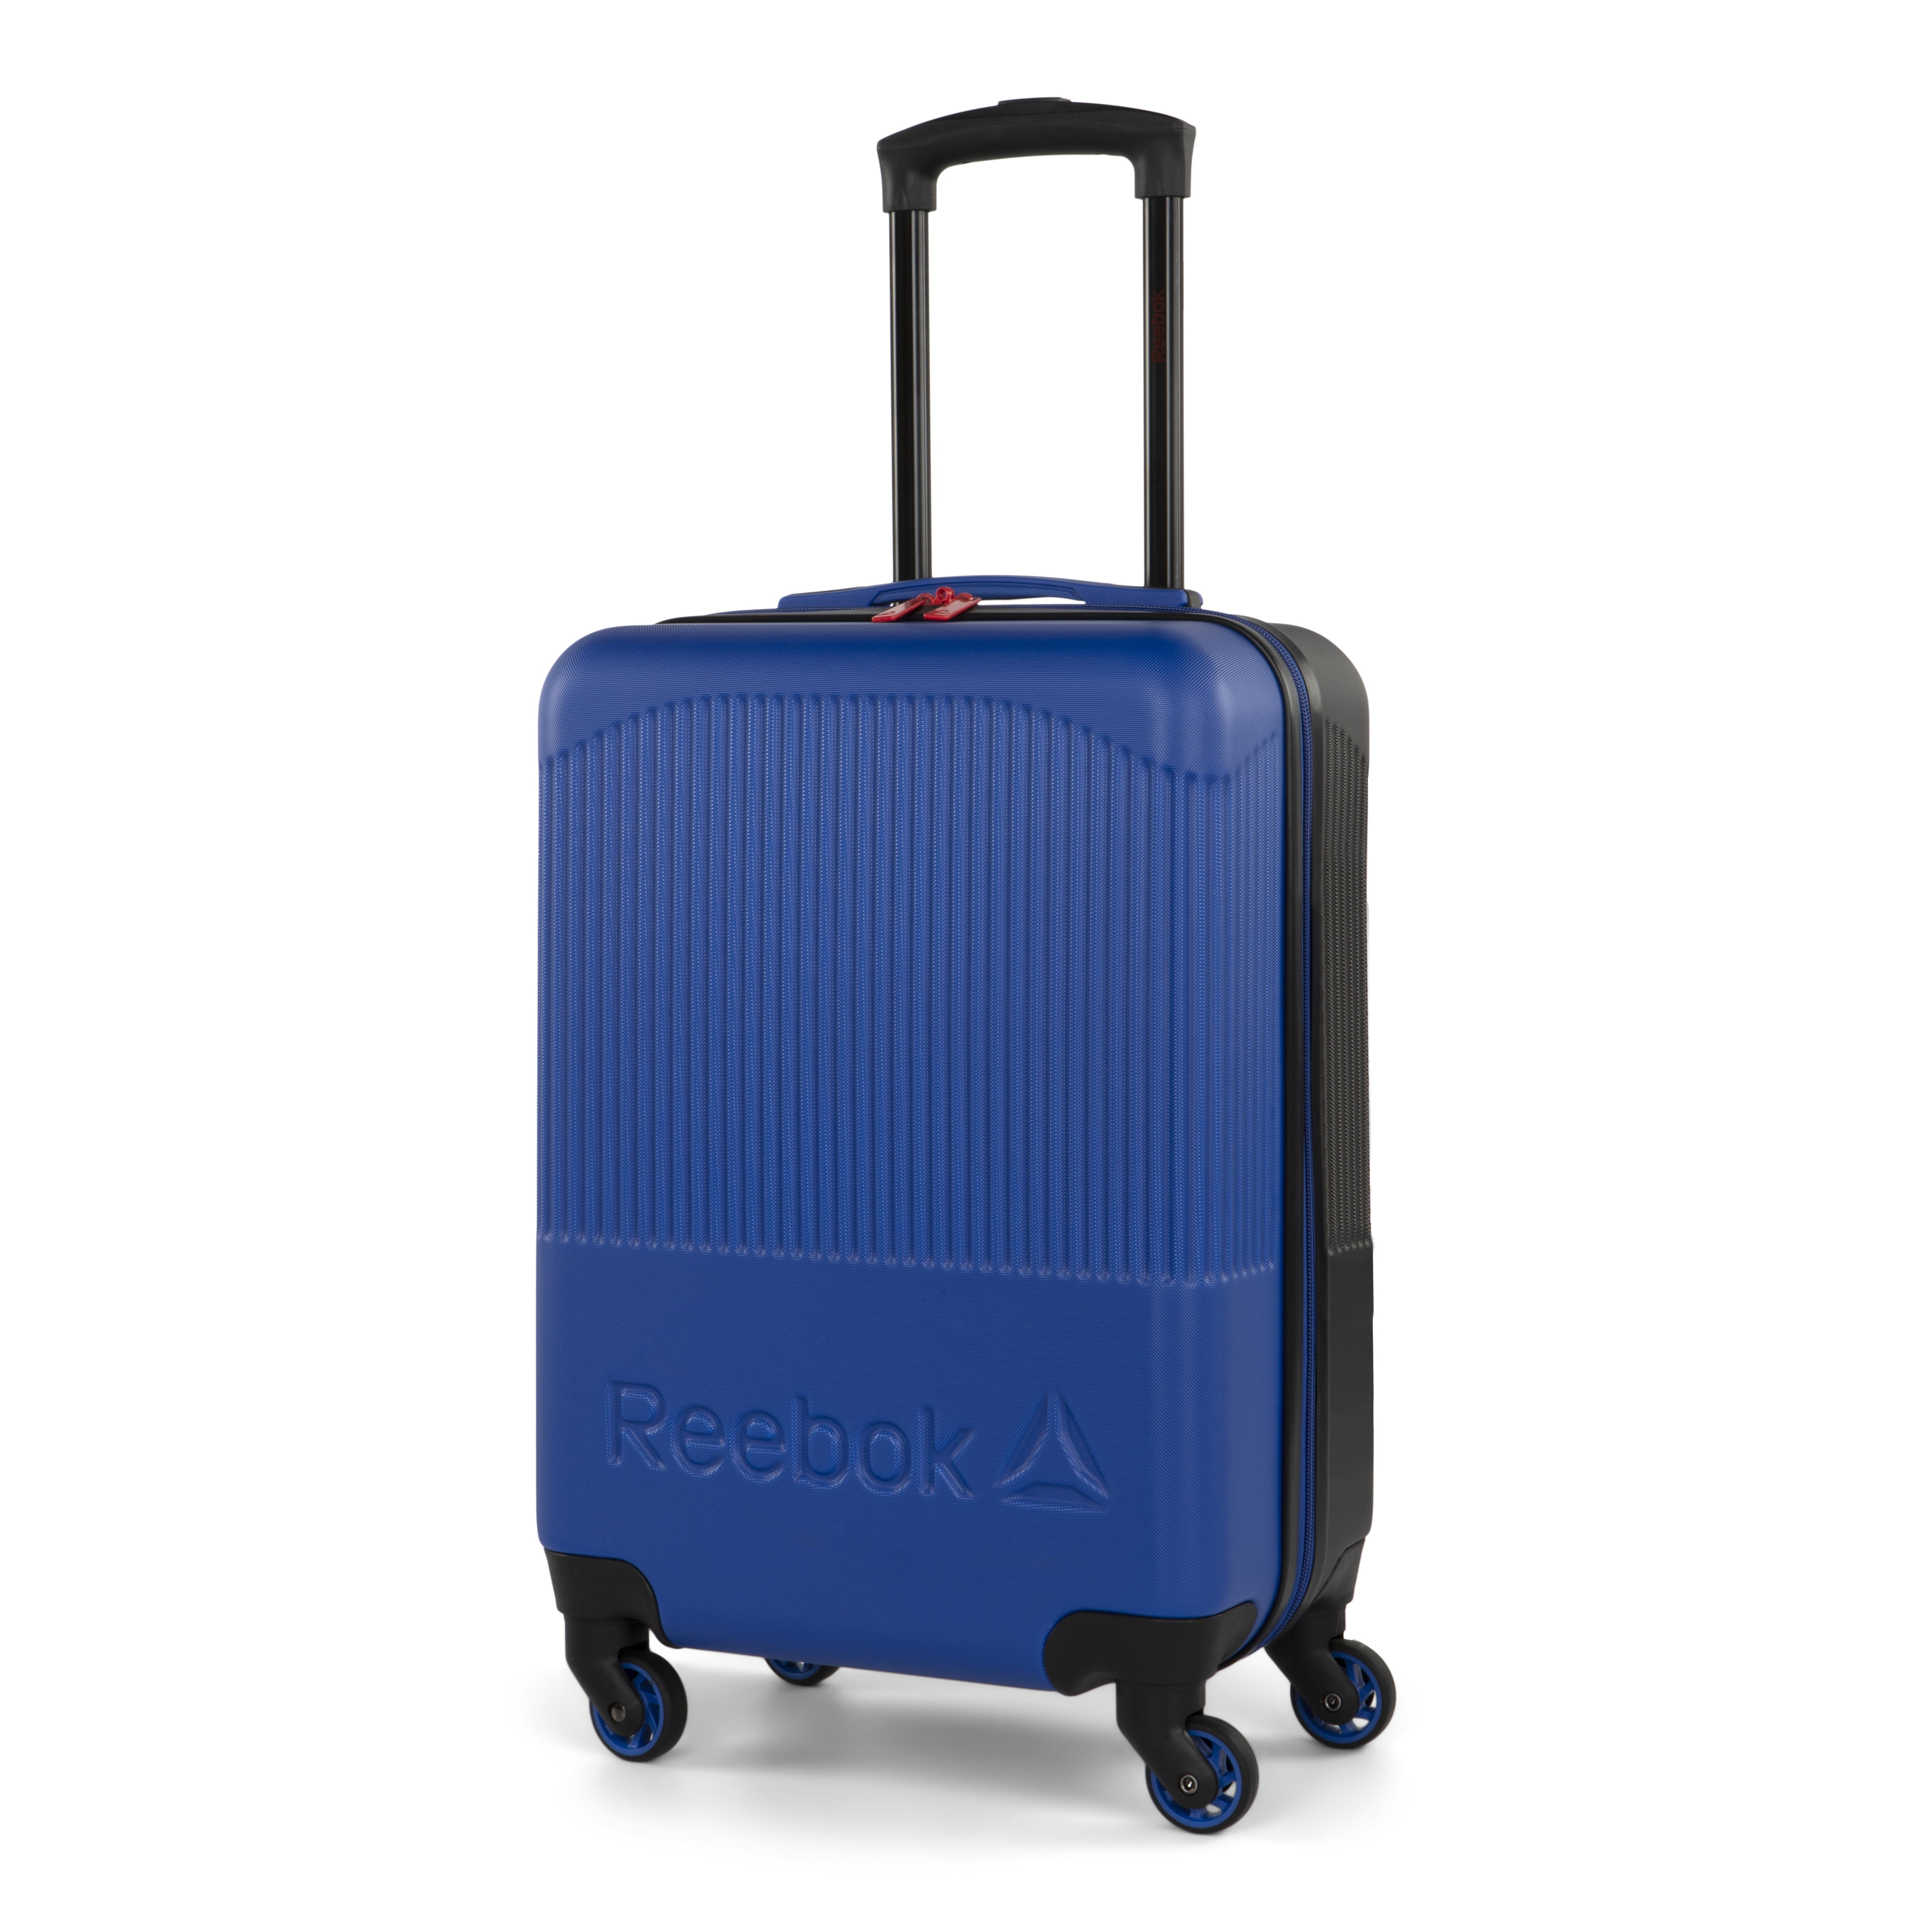 Reebok - Time Out Collection - Carry-on Hardside Luggage - ABS/PC ...